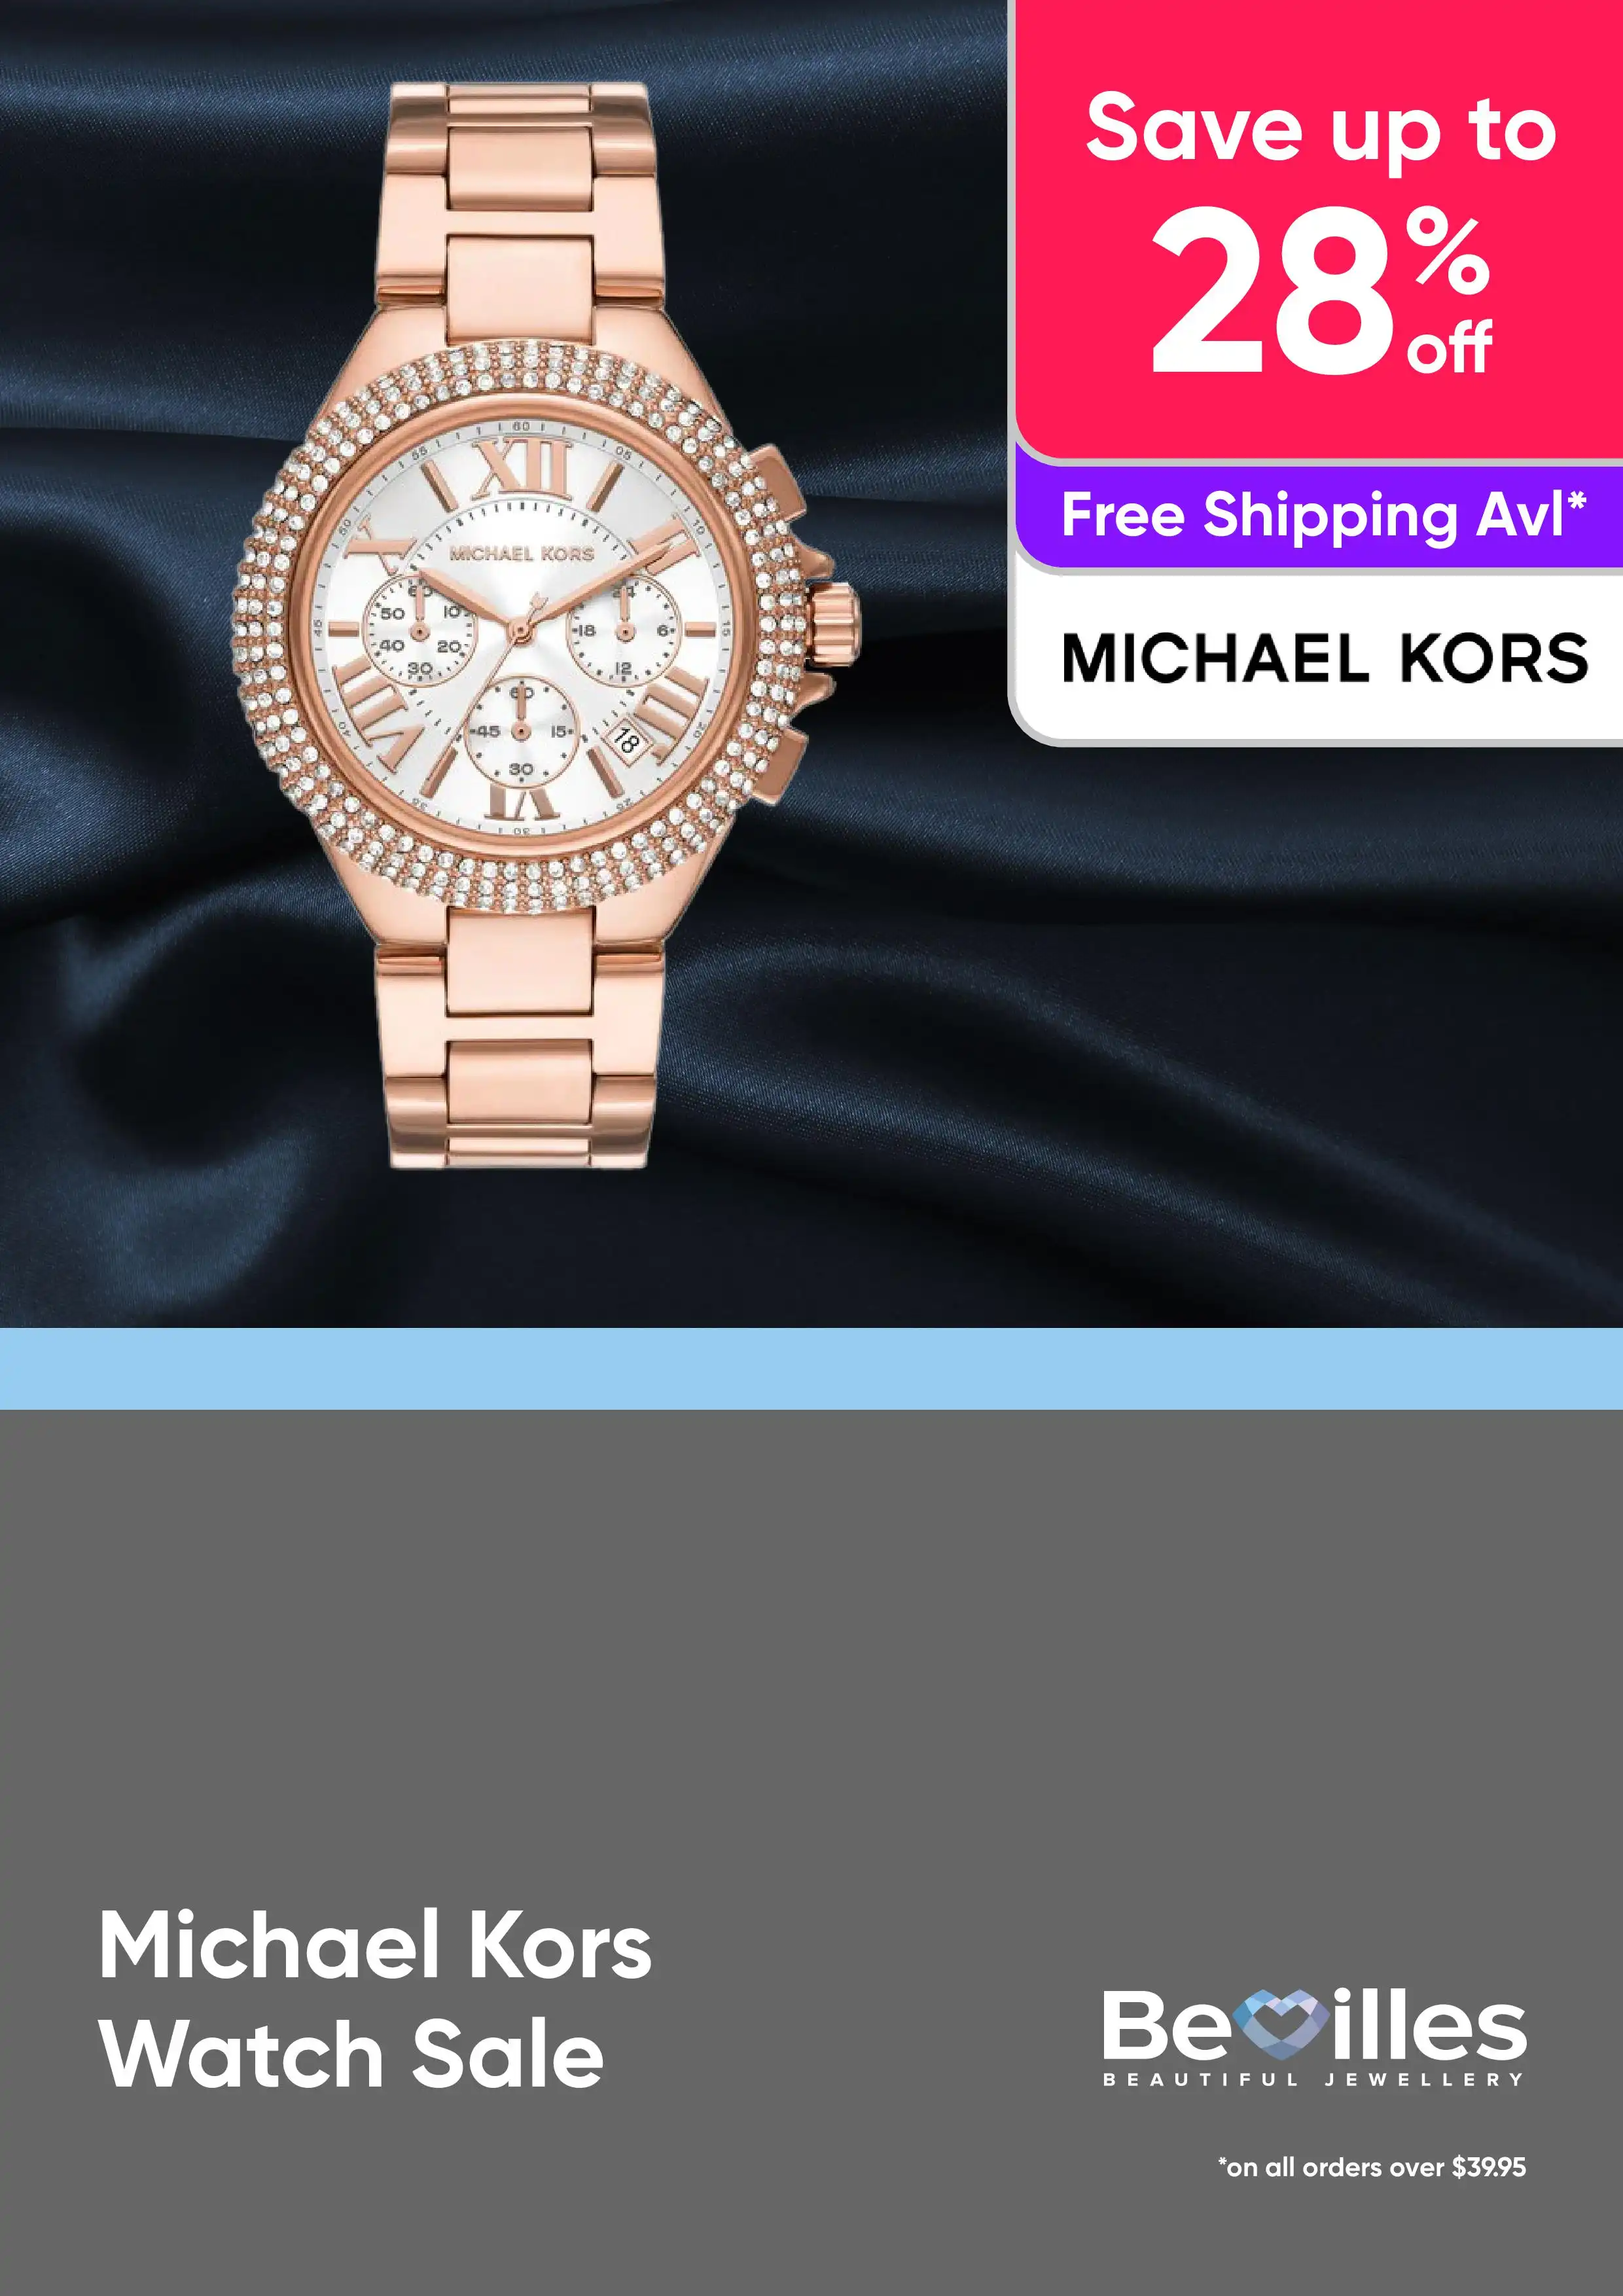 Michael Kors Watch Sale - up to 28% off